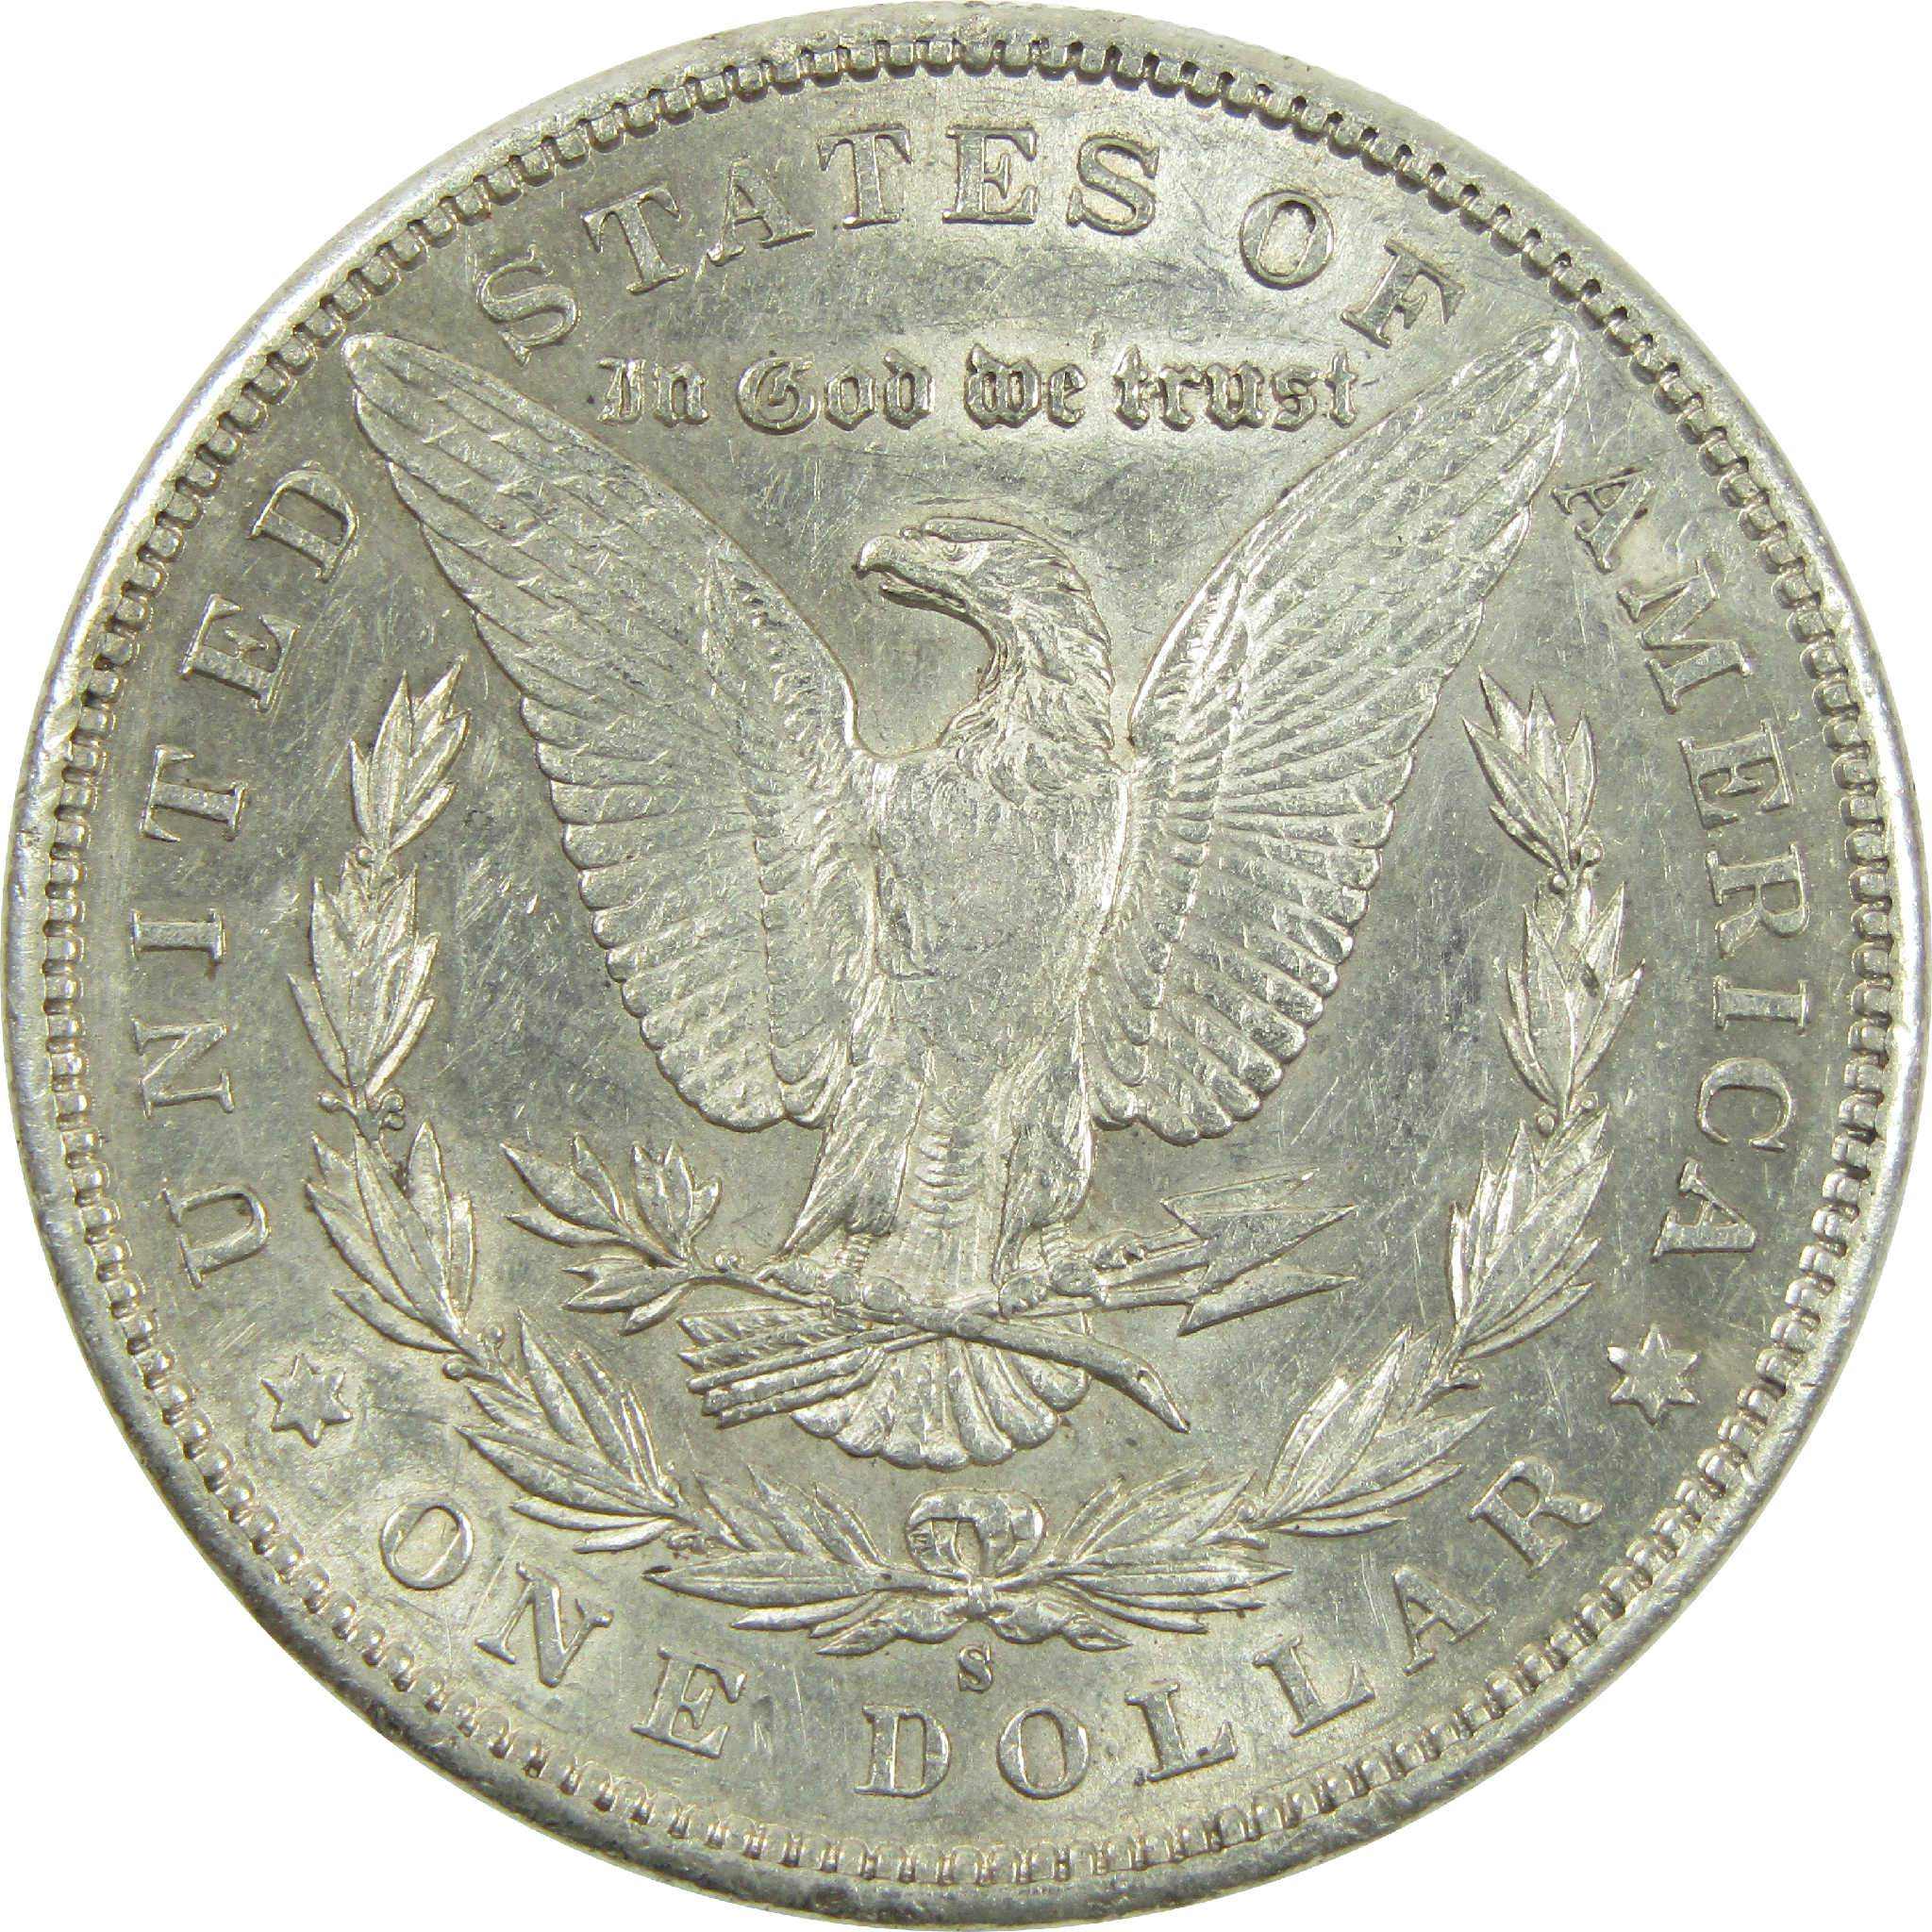 1897 S Morgan Dollar AU About Uncirculated Silver $1 Coin SKU:I13500